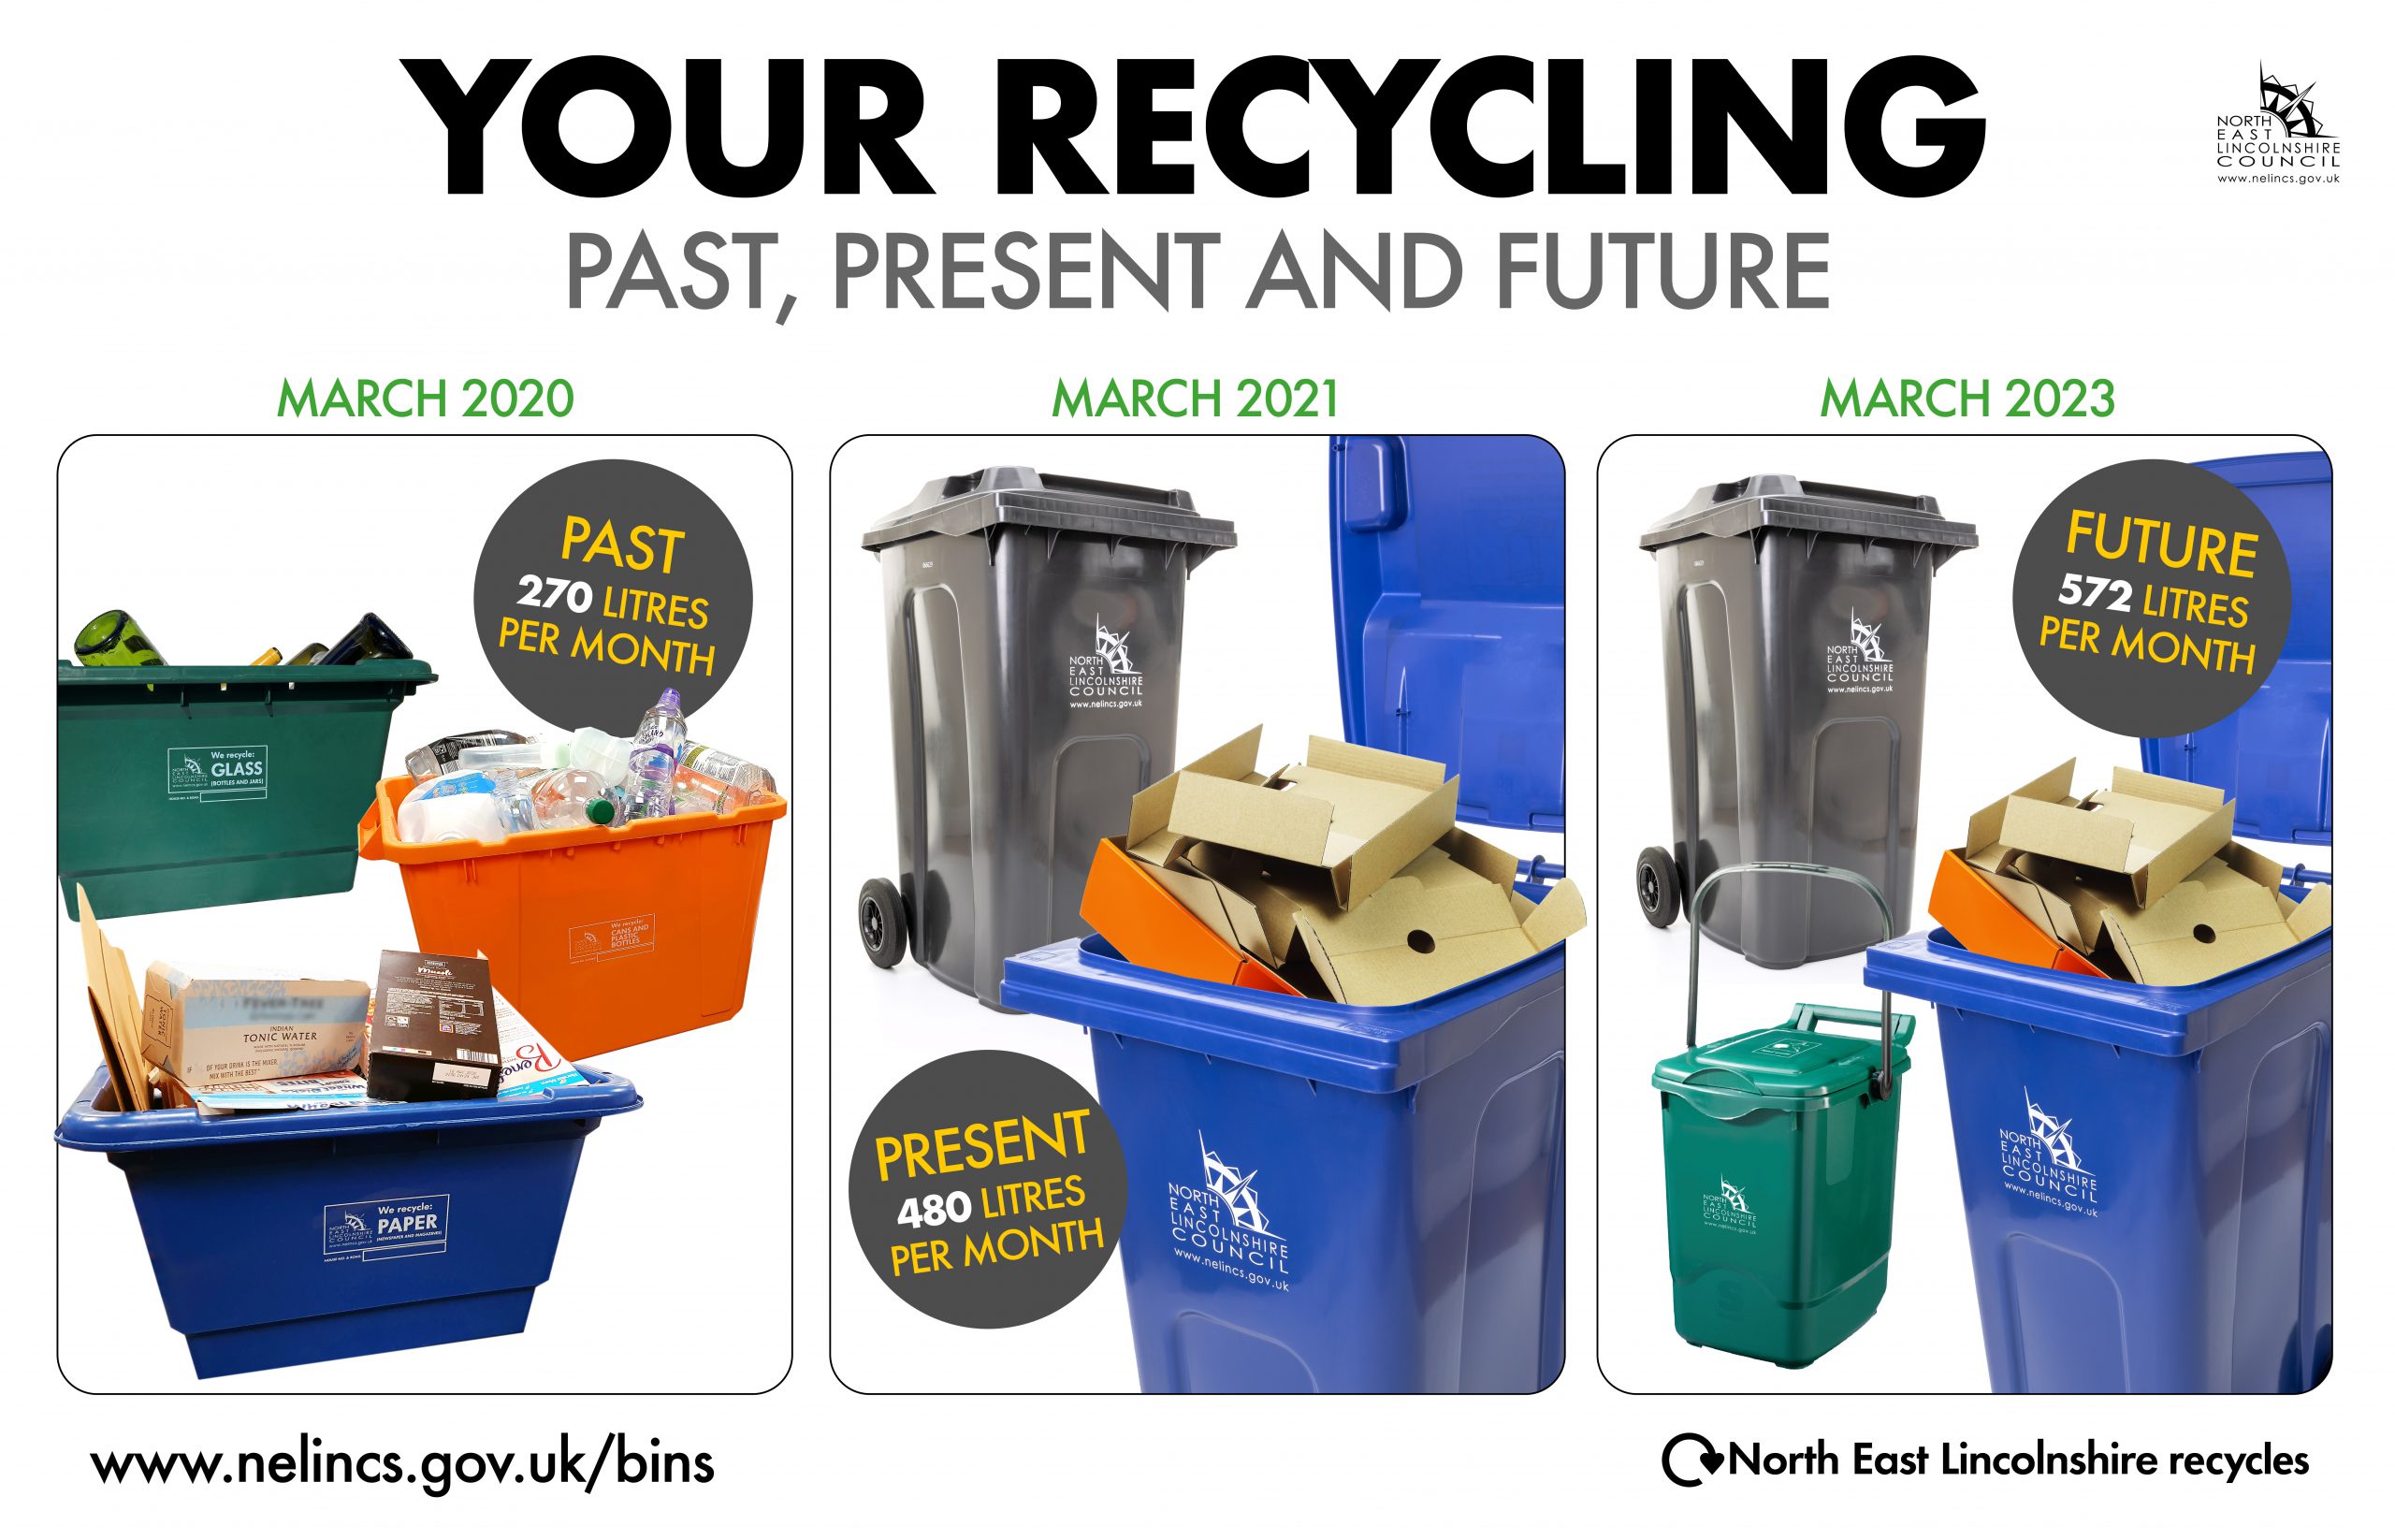 Recycling bins fit for the future NELC NELC